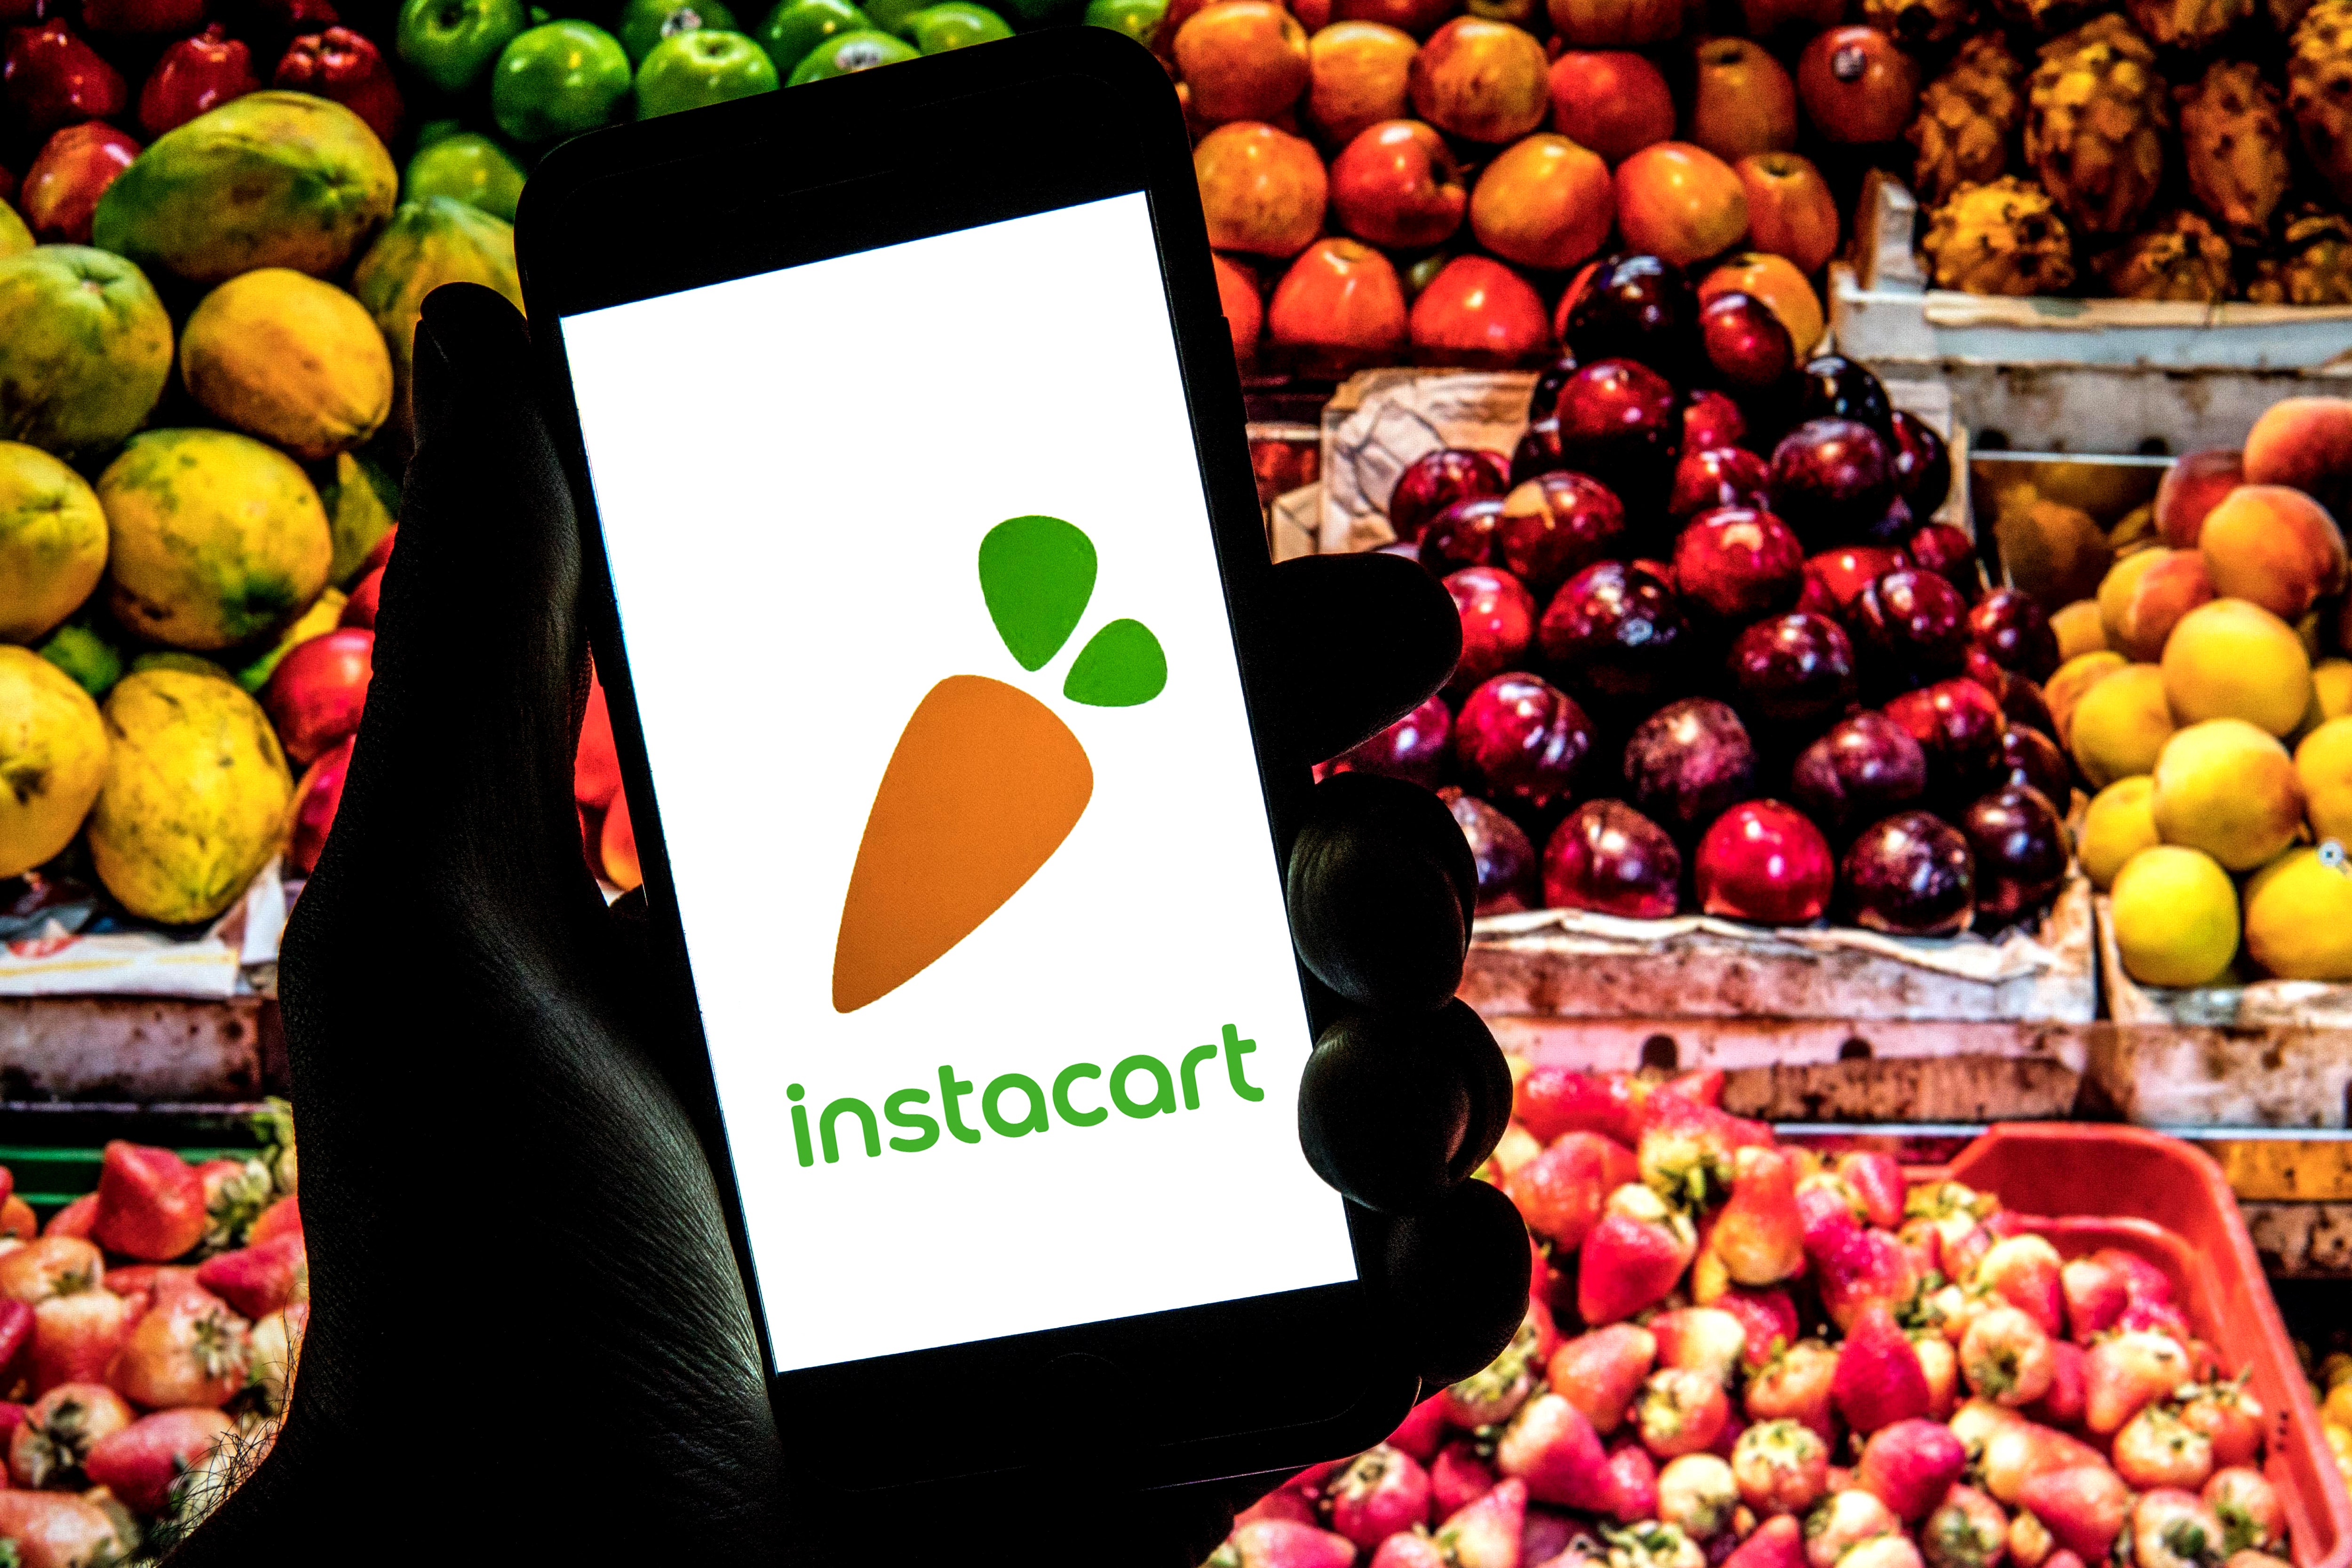 Florida man shoots at Instacart delivery drivers who pulled up to wrong home: report